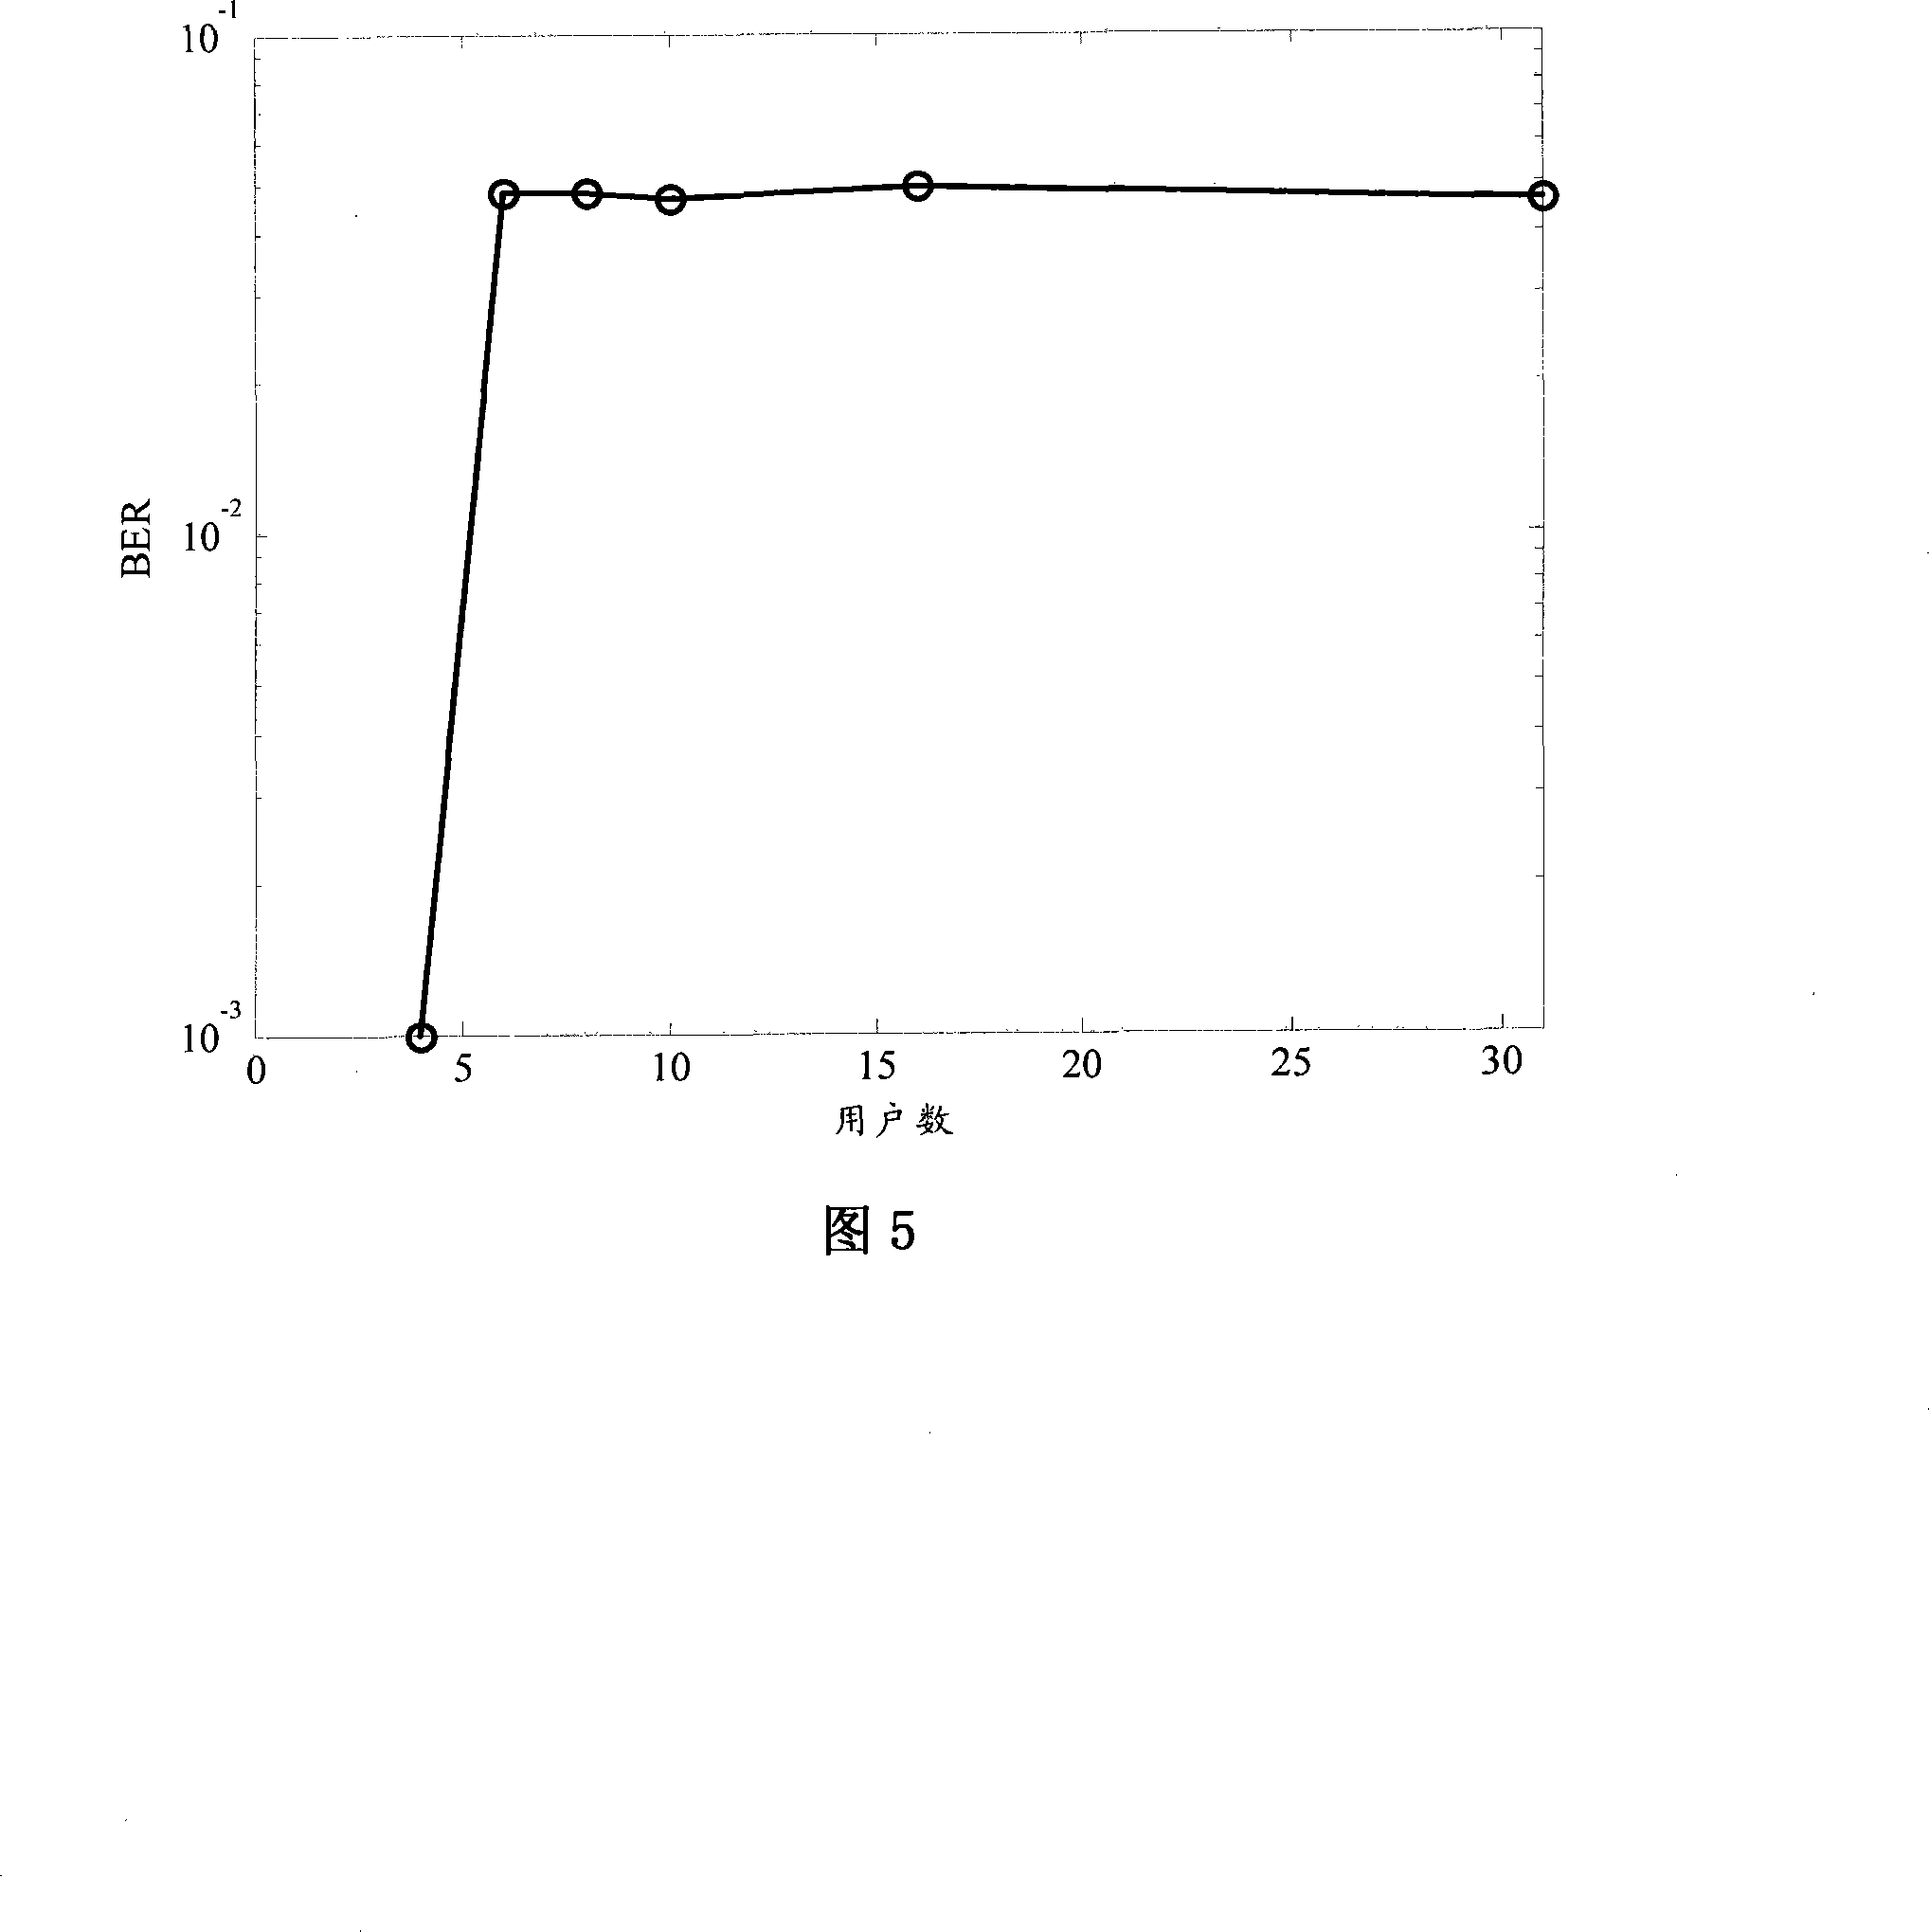 Particle filtering method for asynchronous DS-CDMA blind multi-user detection